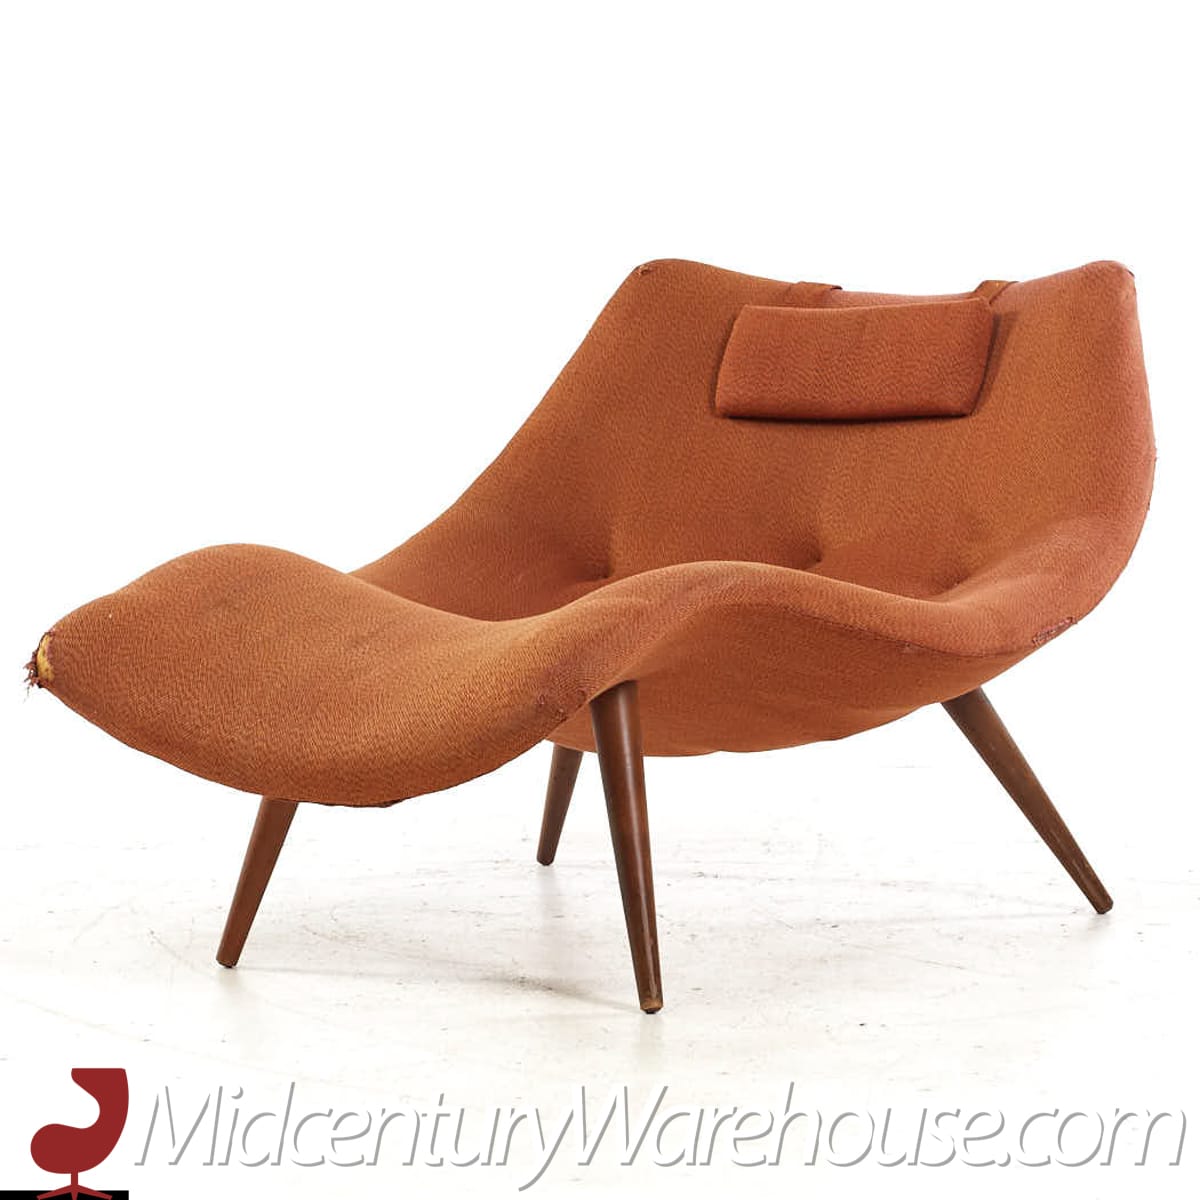 Adrian Pearsall for Craft Associates Mid Century 1828-c Chaise Lounge